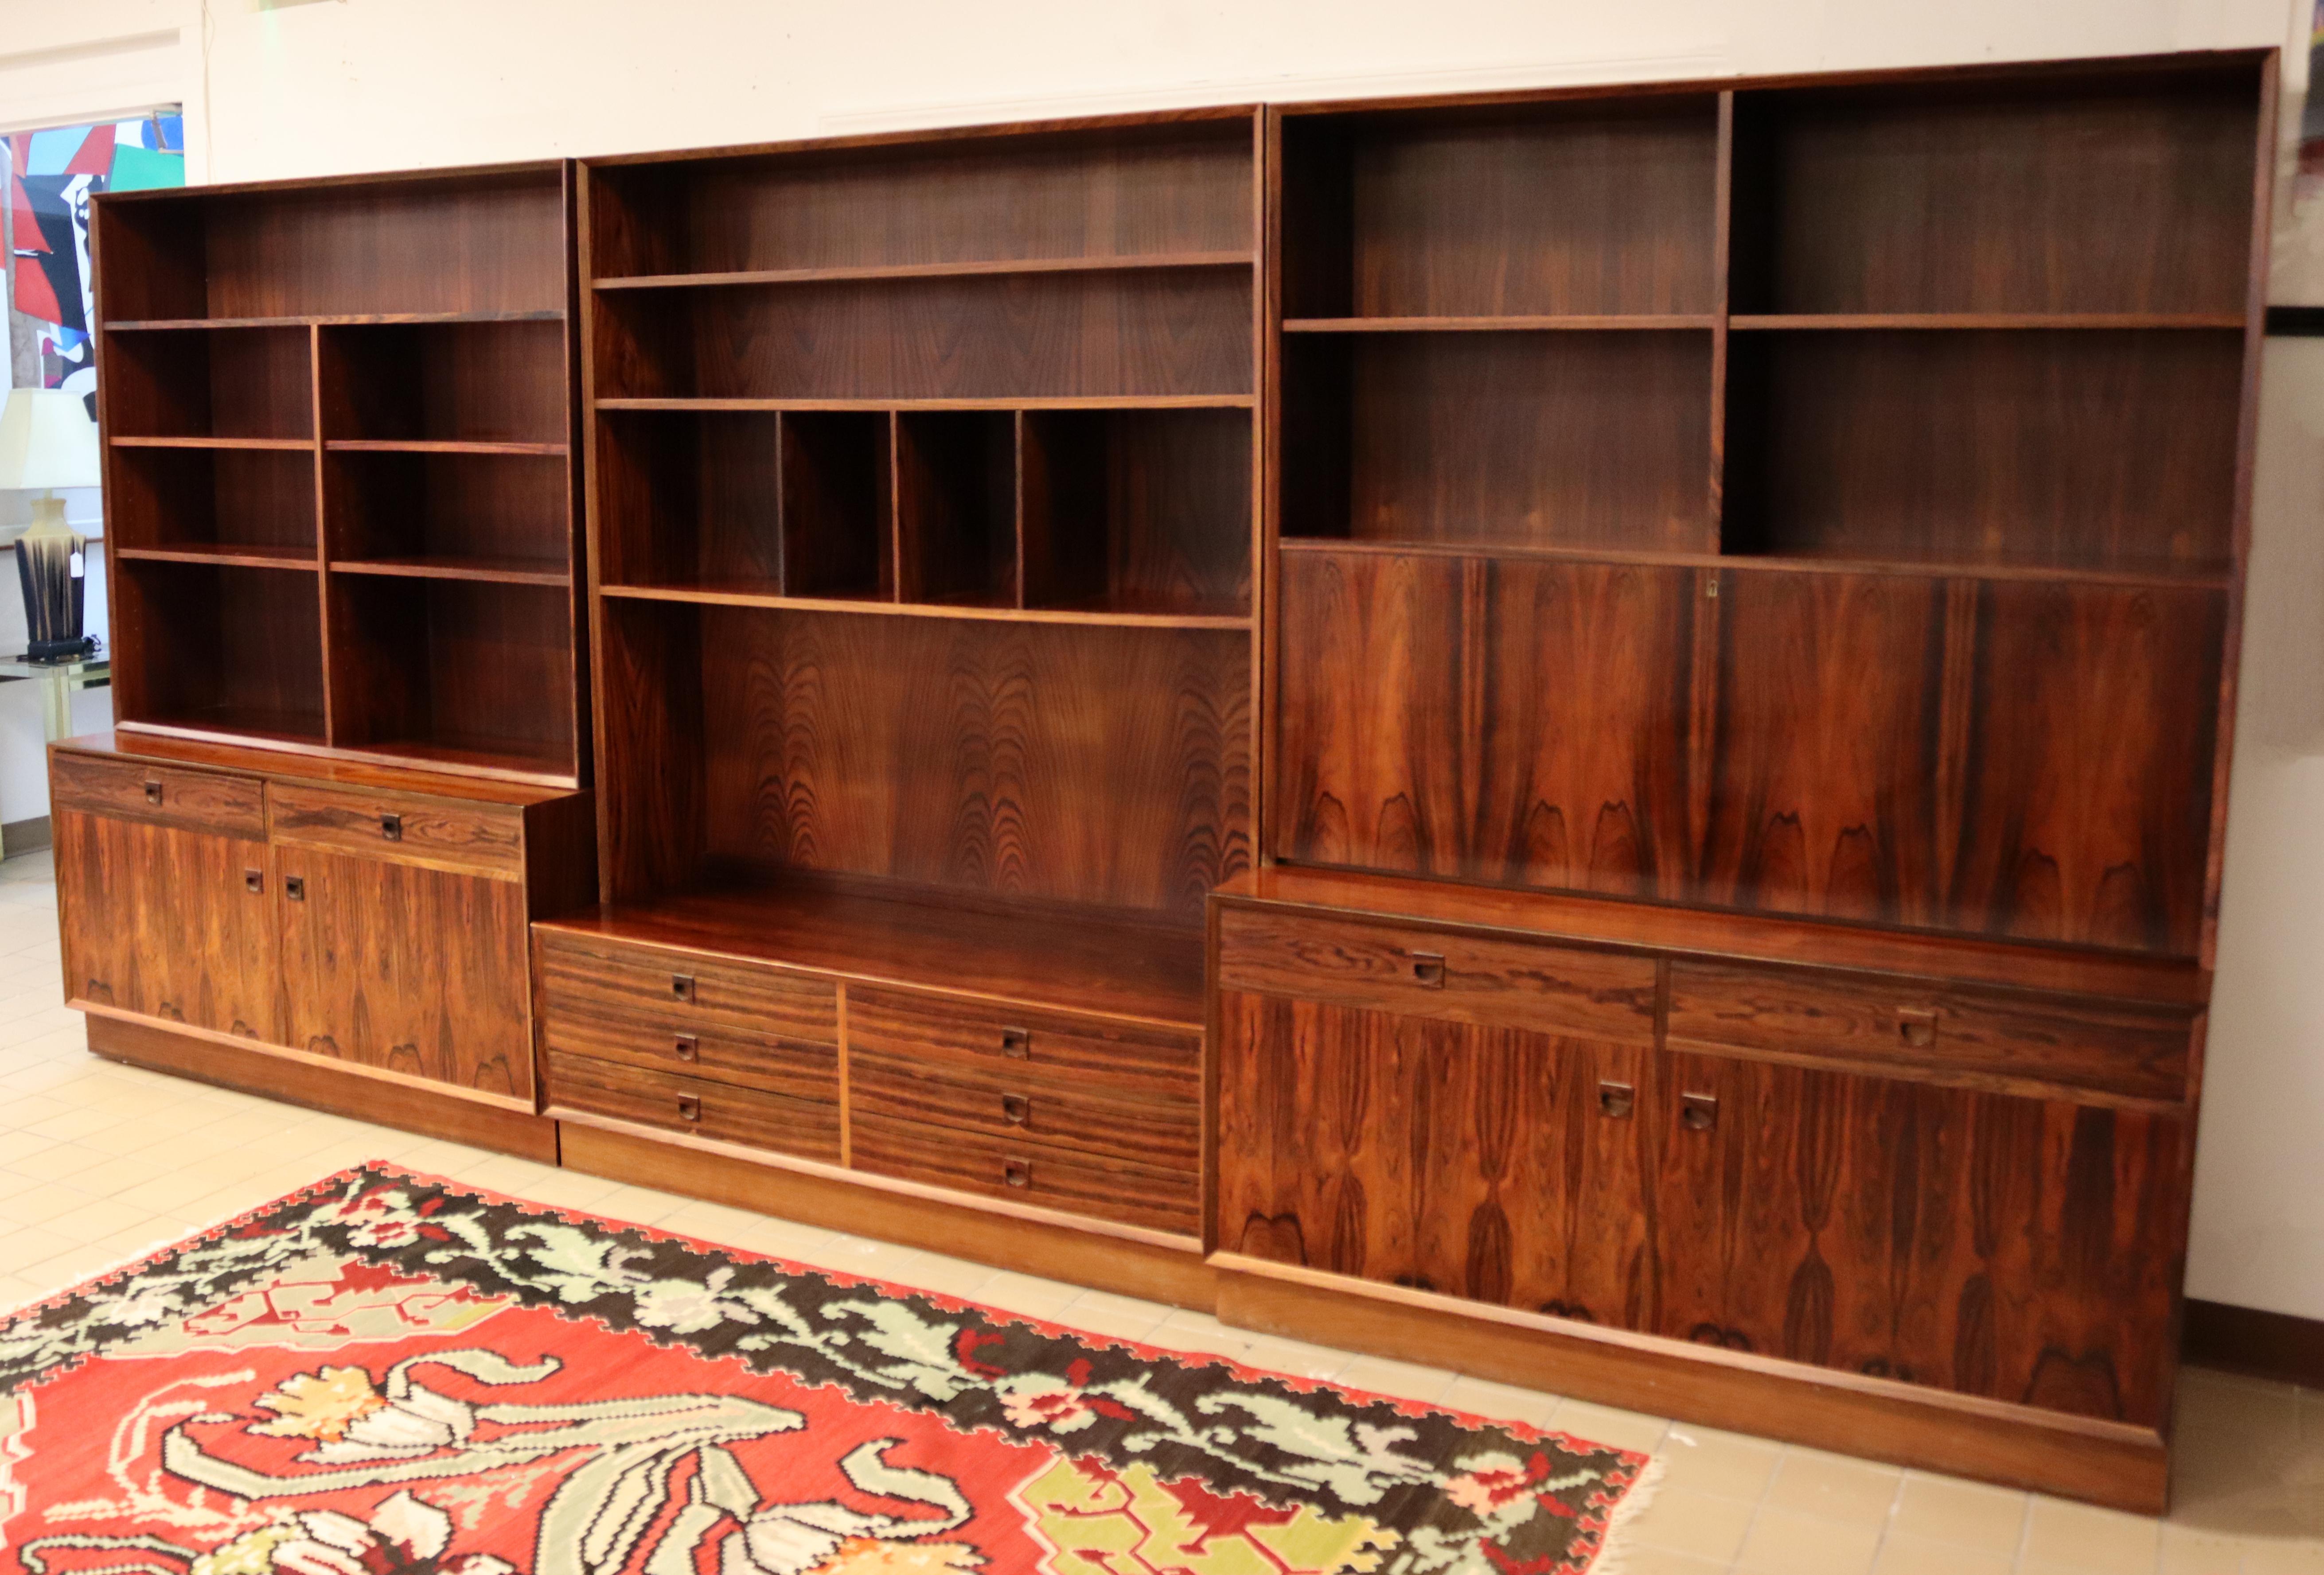 For your consideration is a ravishing, rosewood wall unit, made in Denmark, circa the 1970s. Includes drop down desk with key. In excellent condition. Dimensions: 158